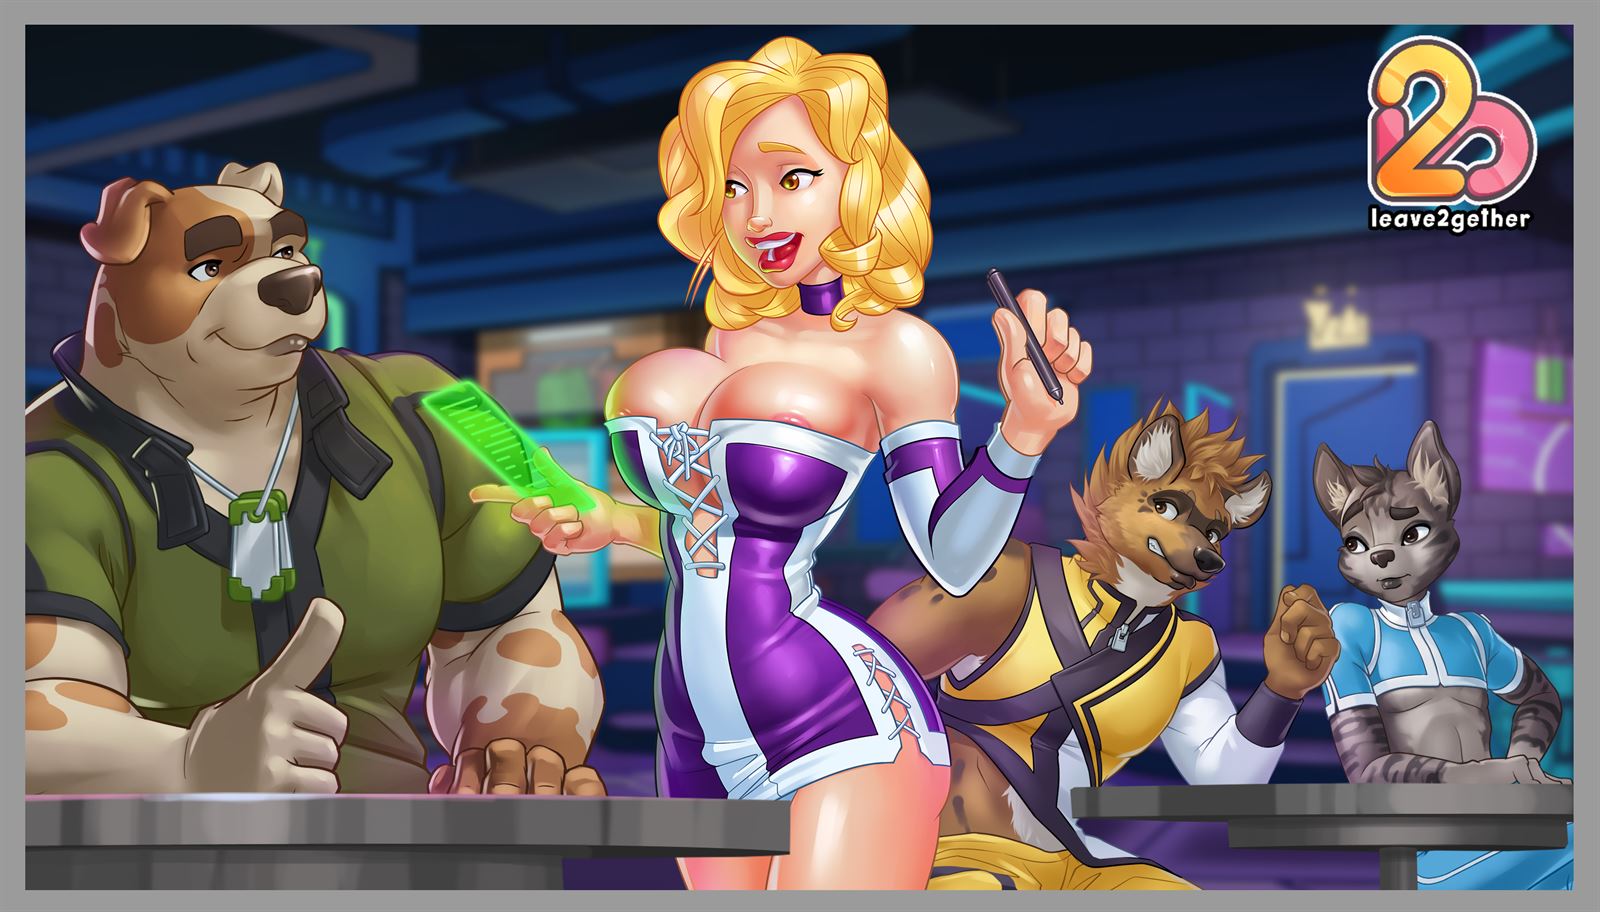 Furry Group Oral Sex - Panthea Act 2 Unity Porn Sex Game v.0.6.4 Cracked Download for Windows,  MacOS, Linux, Android